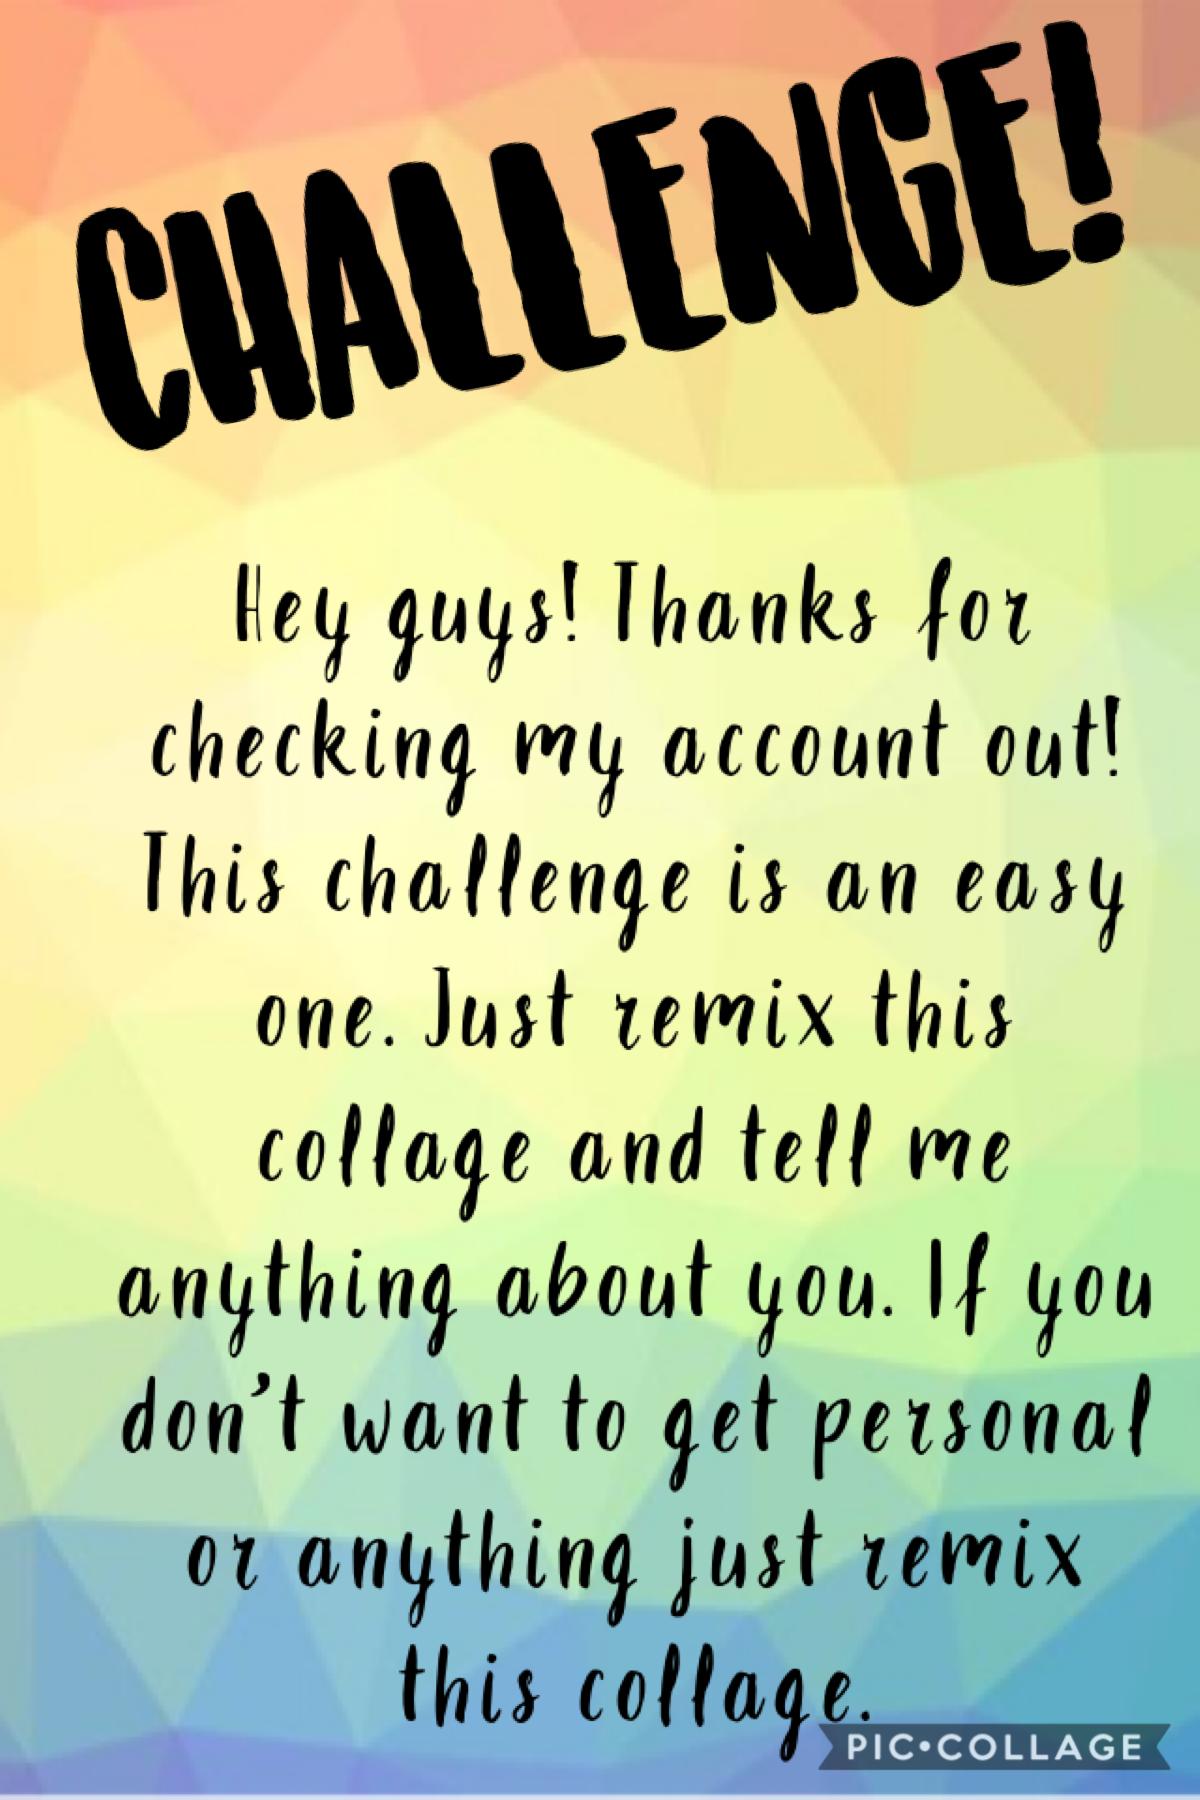 Have fun doing this challenge!